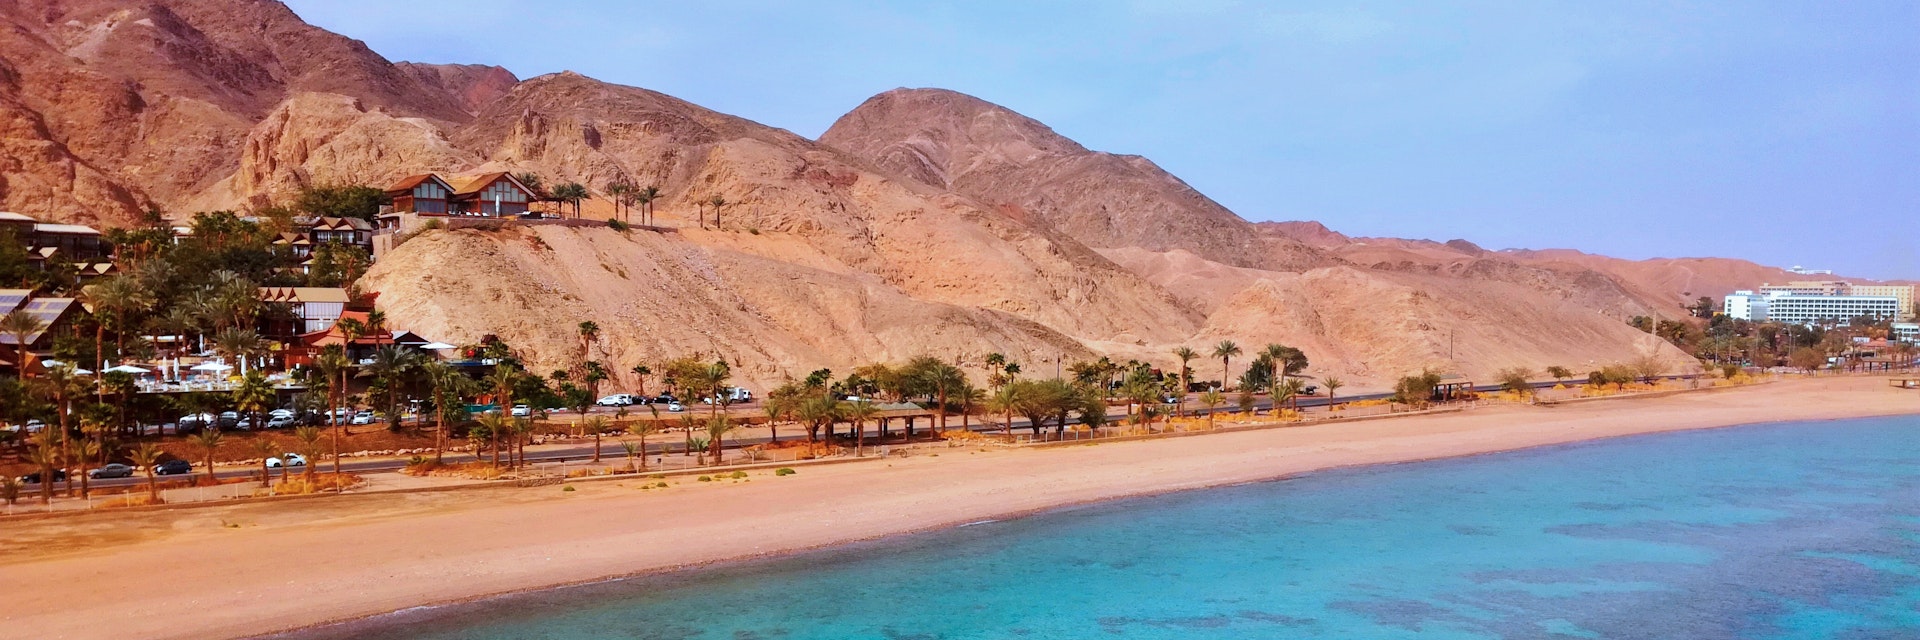 View from Underwater Observatory Park to Eilat Coral Beach Nature Reserve in Israel.; Shutterstock ID 1296502384; purchase_order: 65050; job: ; client: ; other:
1296502384